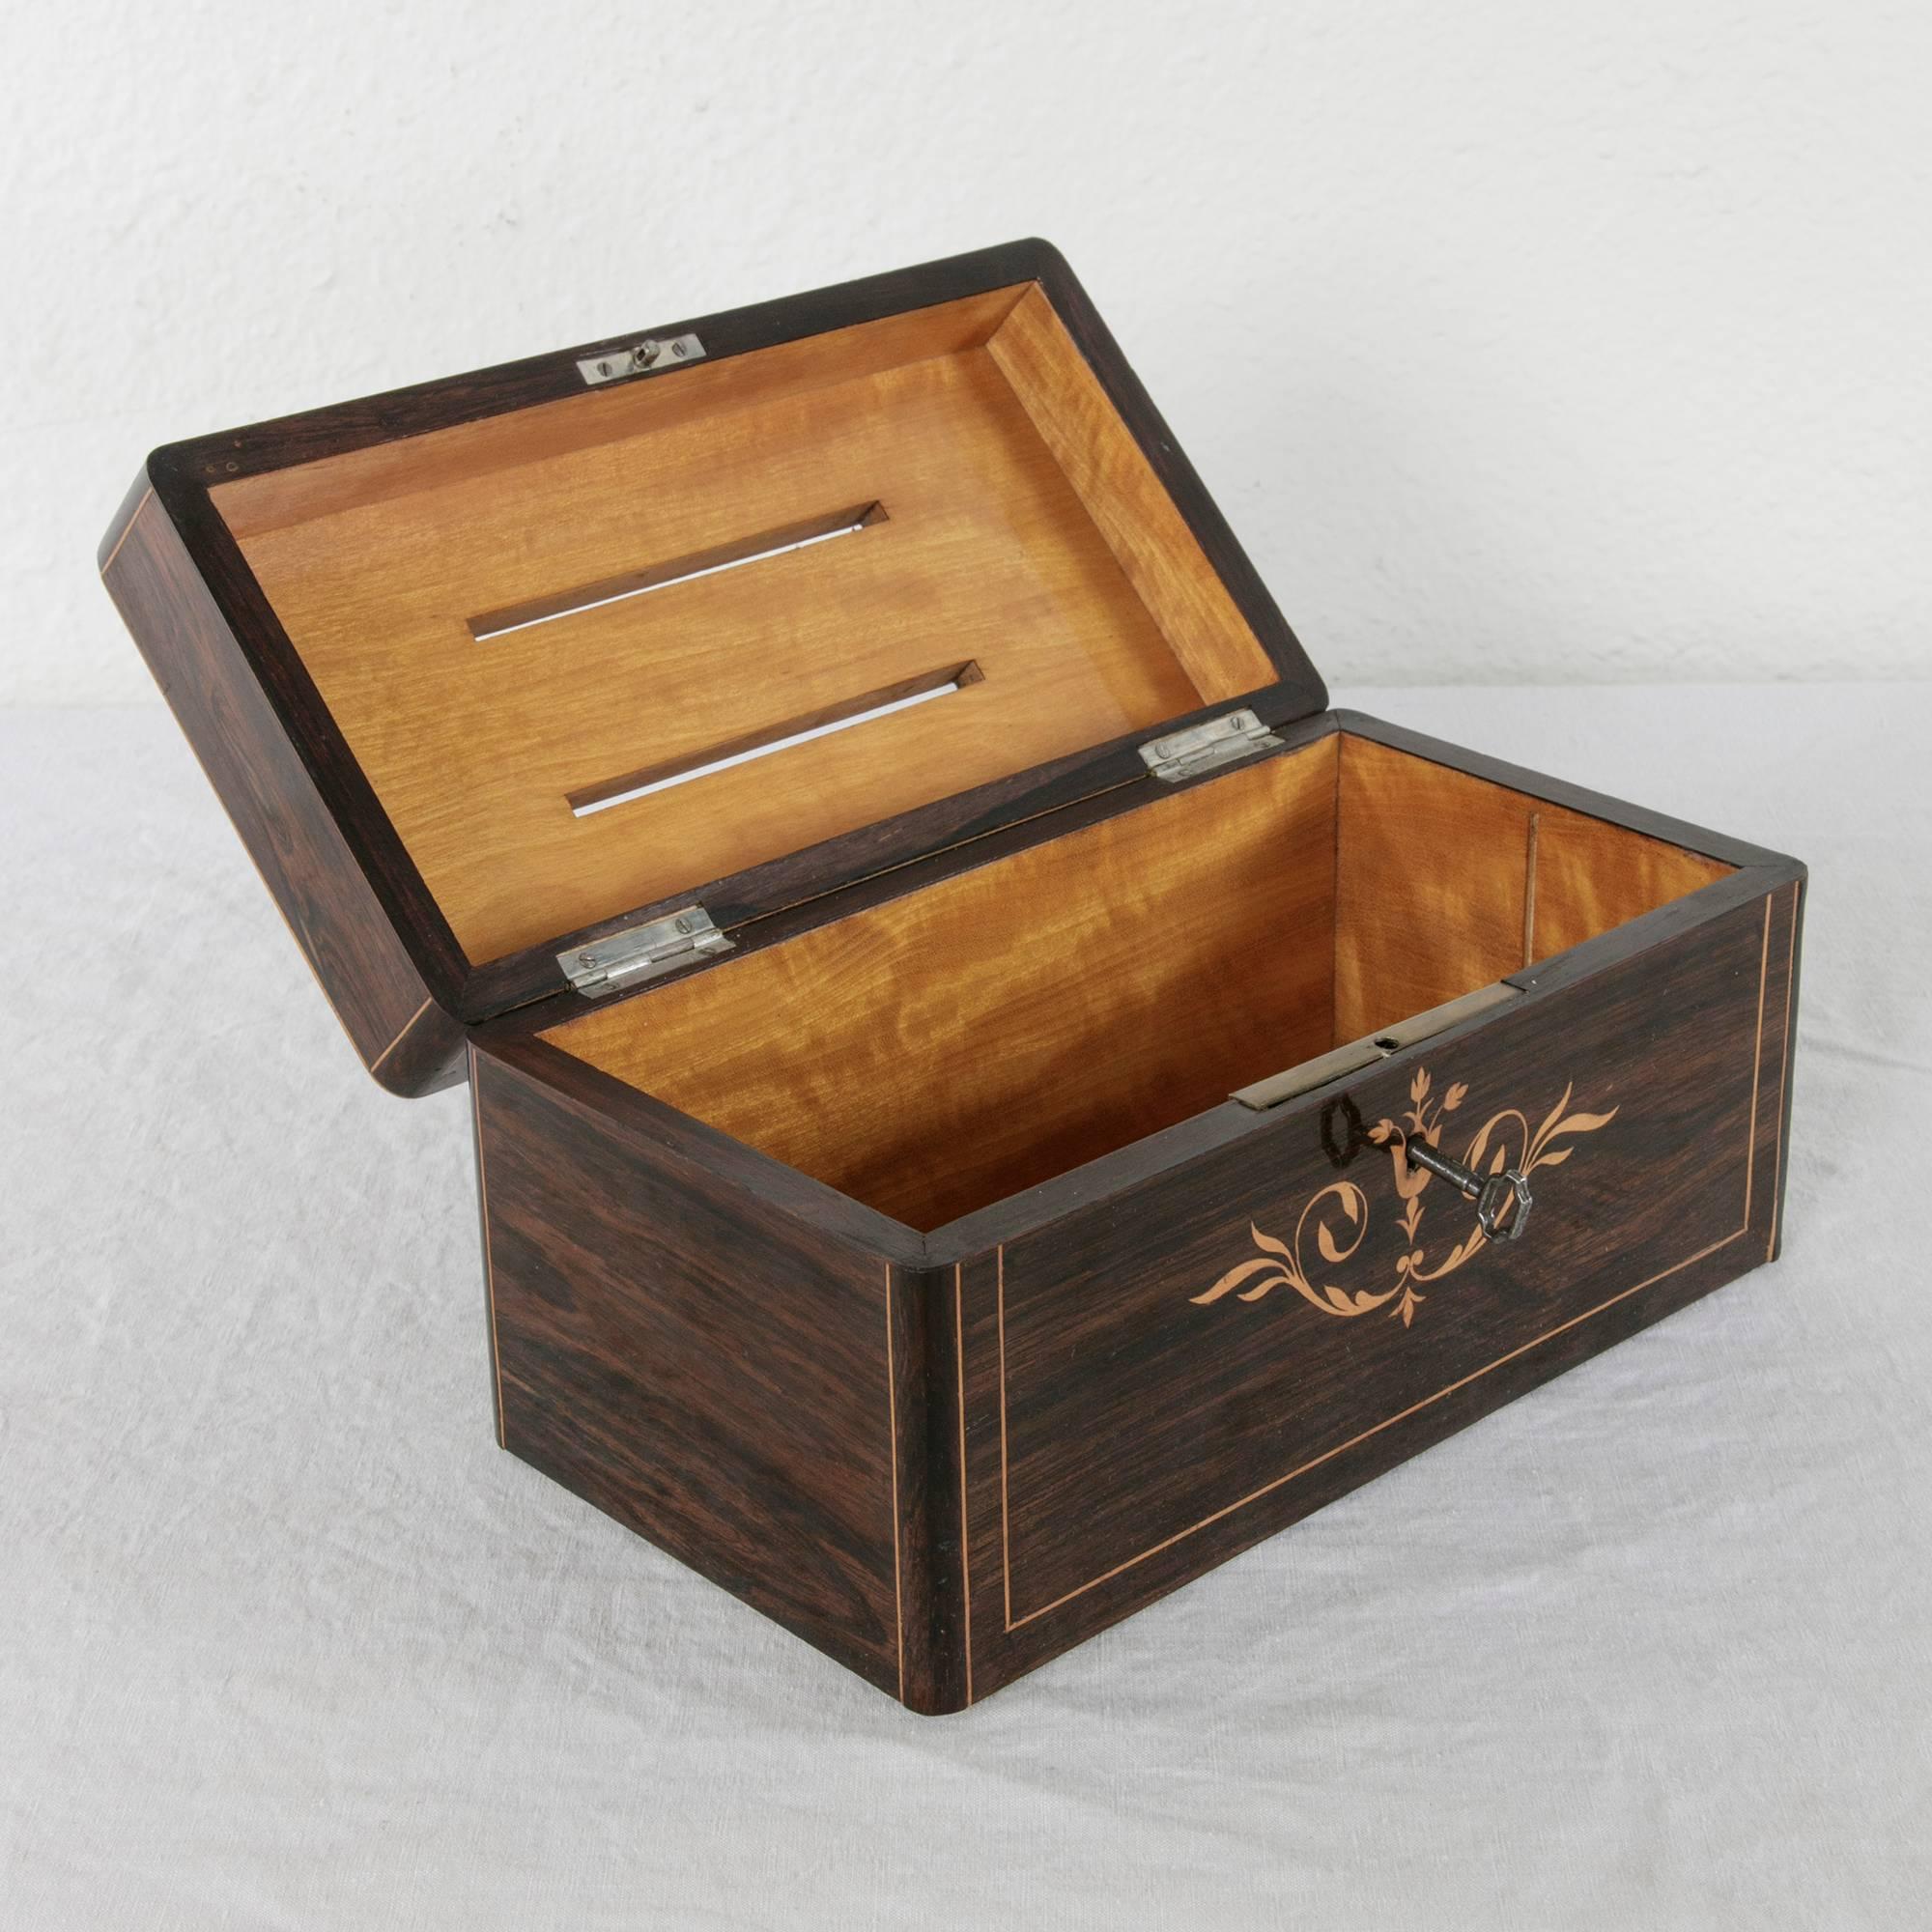 This beautifully inlaid Charles X period box is made from rosewood with lemonwood inlay detailing. The French word for letters, is elegantly inlaid with lemonwood into the top of the box. With two slots in the top originally used for letters